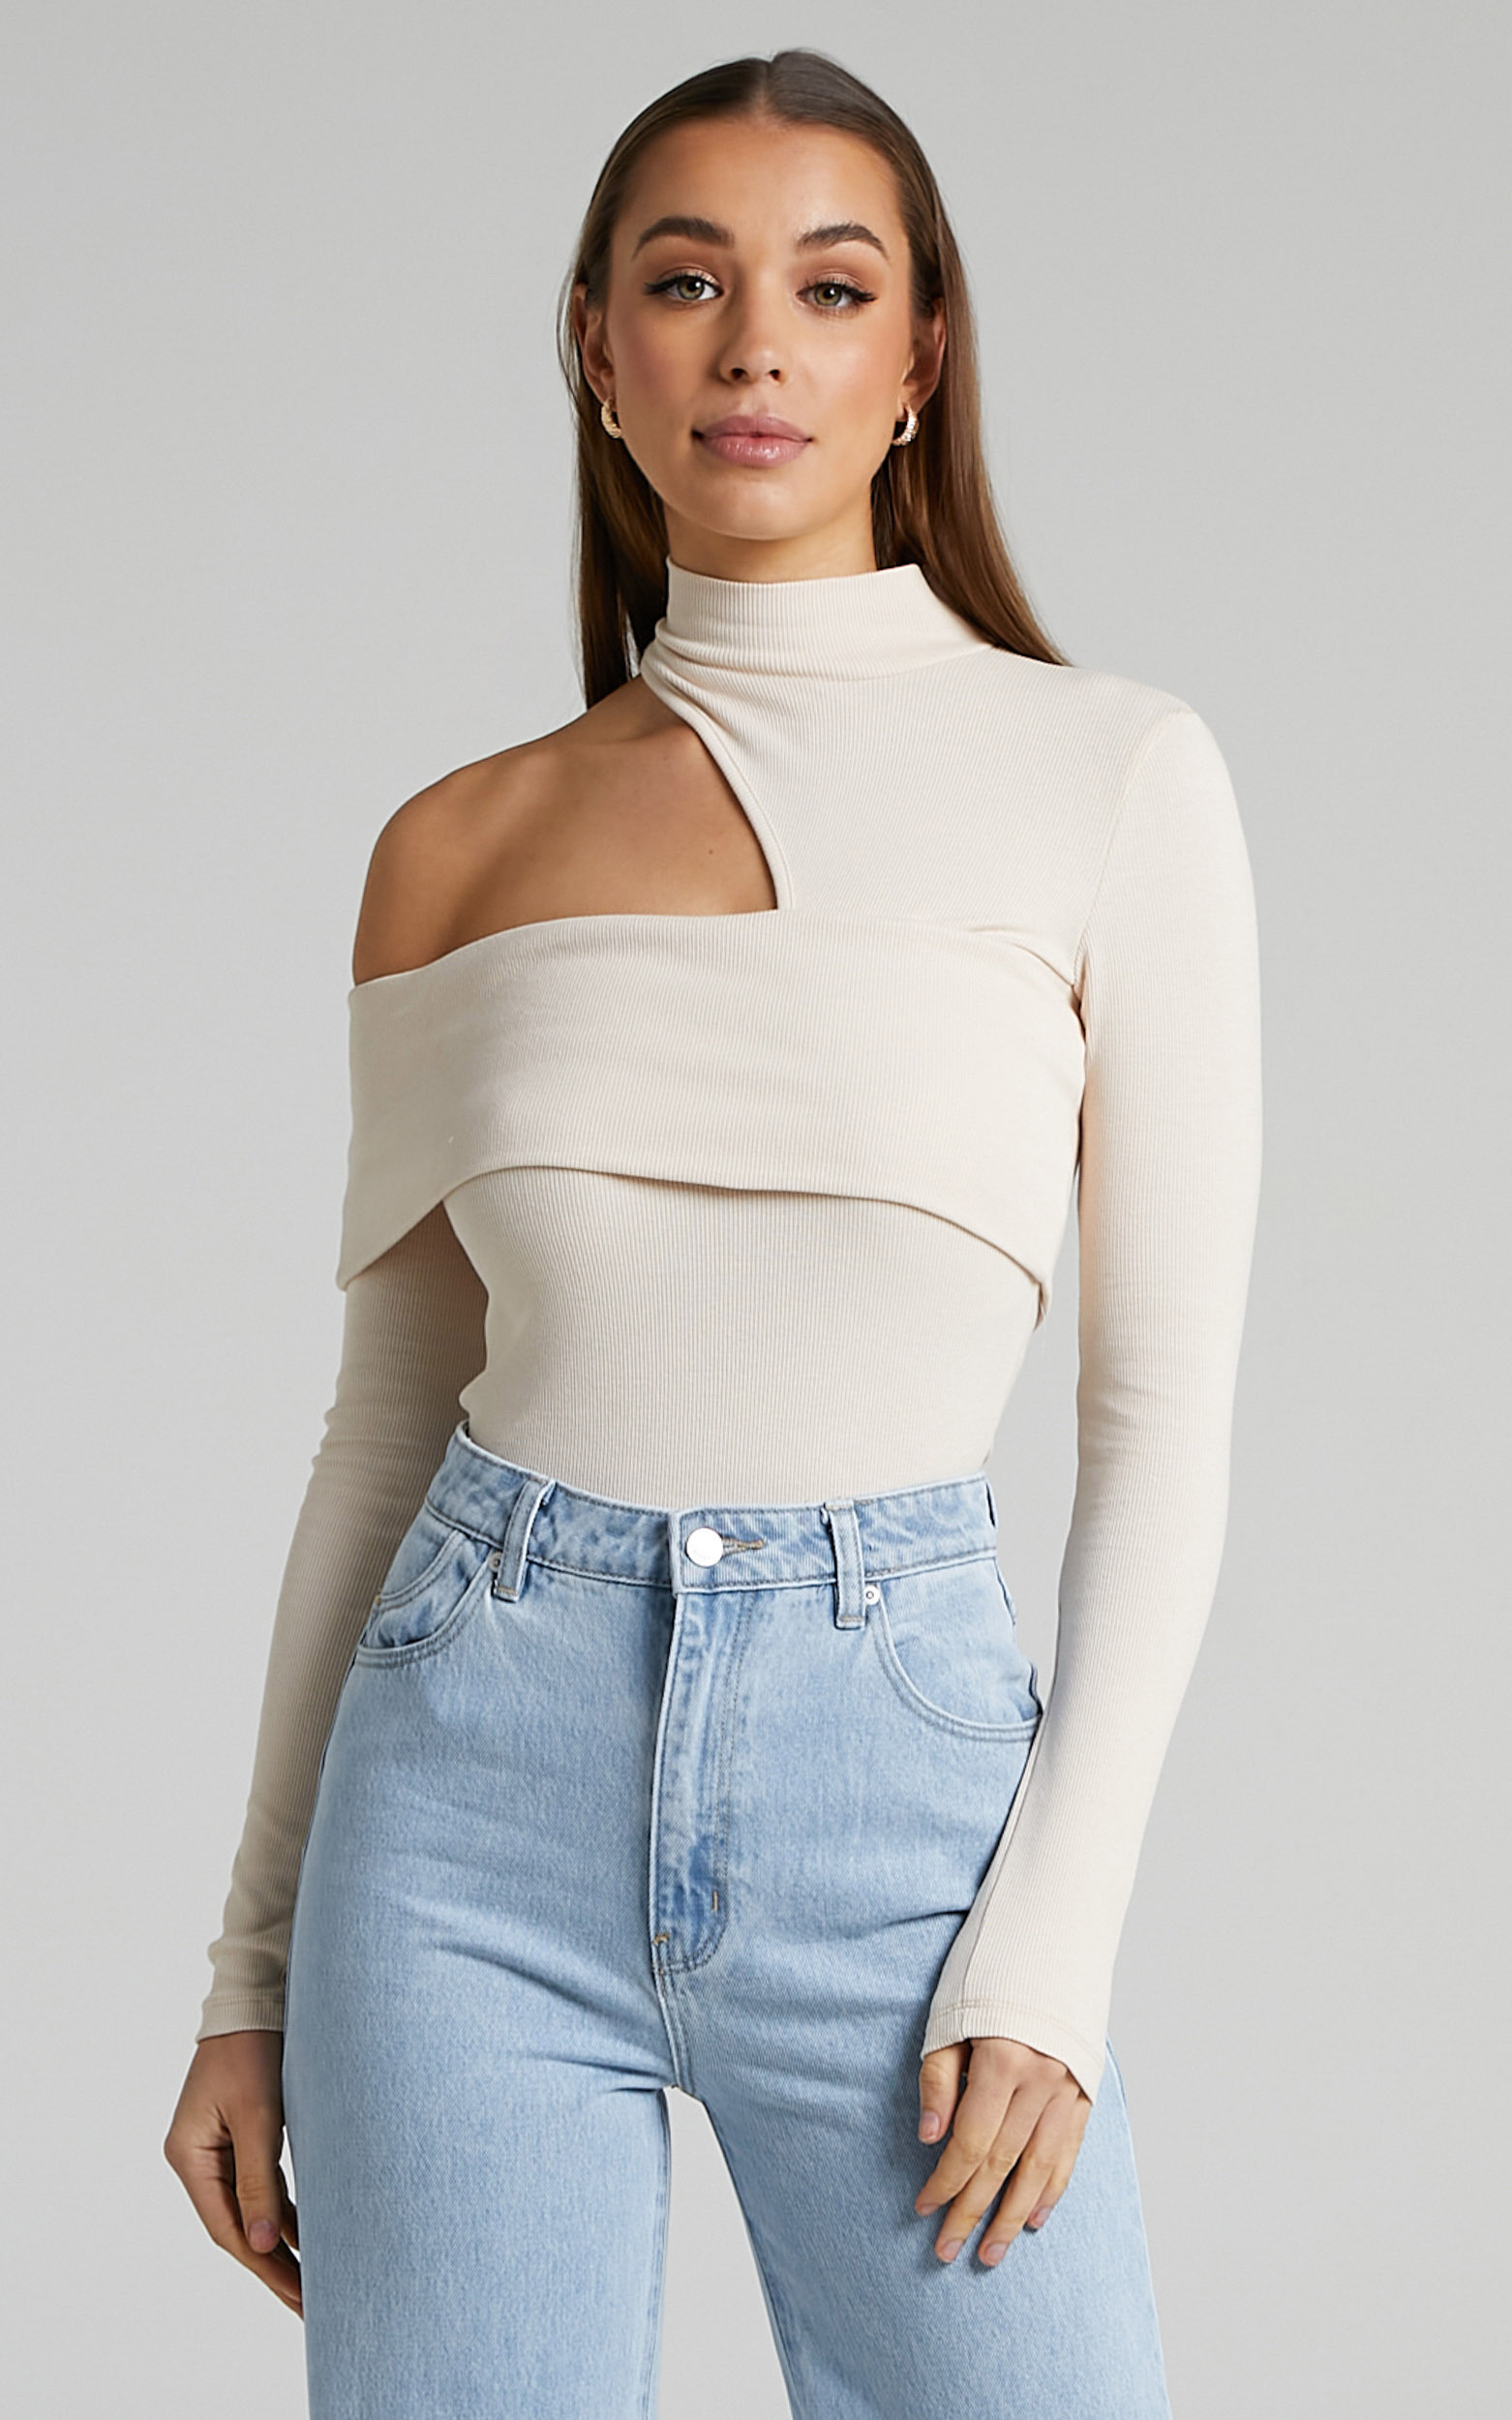 Kiefer Asymmetric Long Sleeve Cutout Top in Cream - 06, CRE3, hi-res image number null